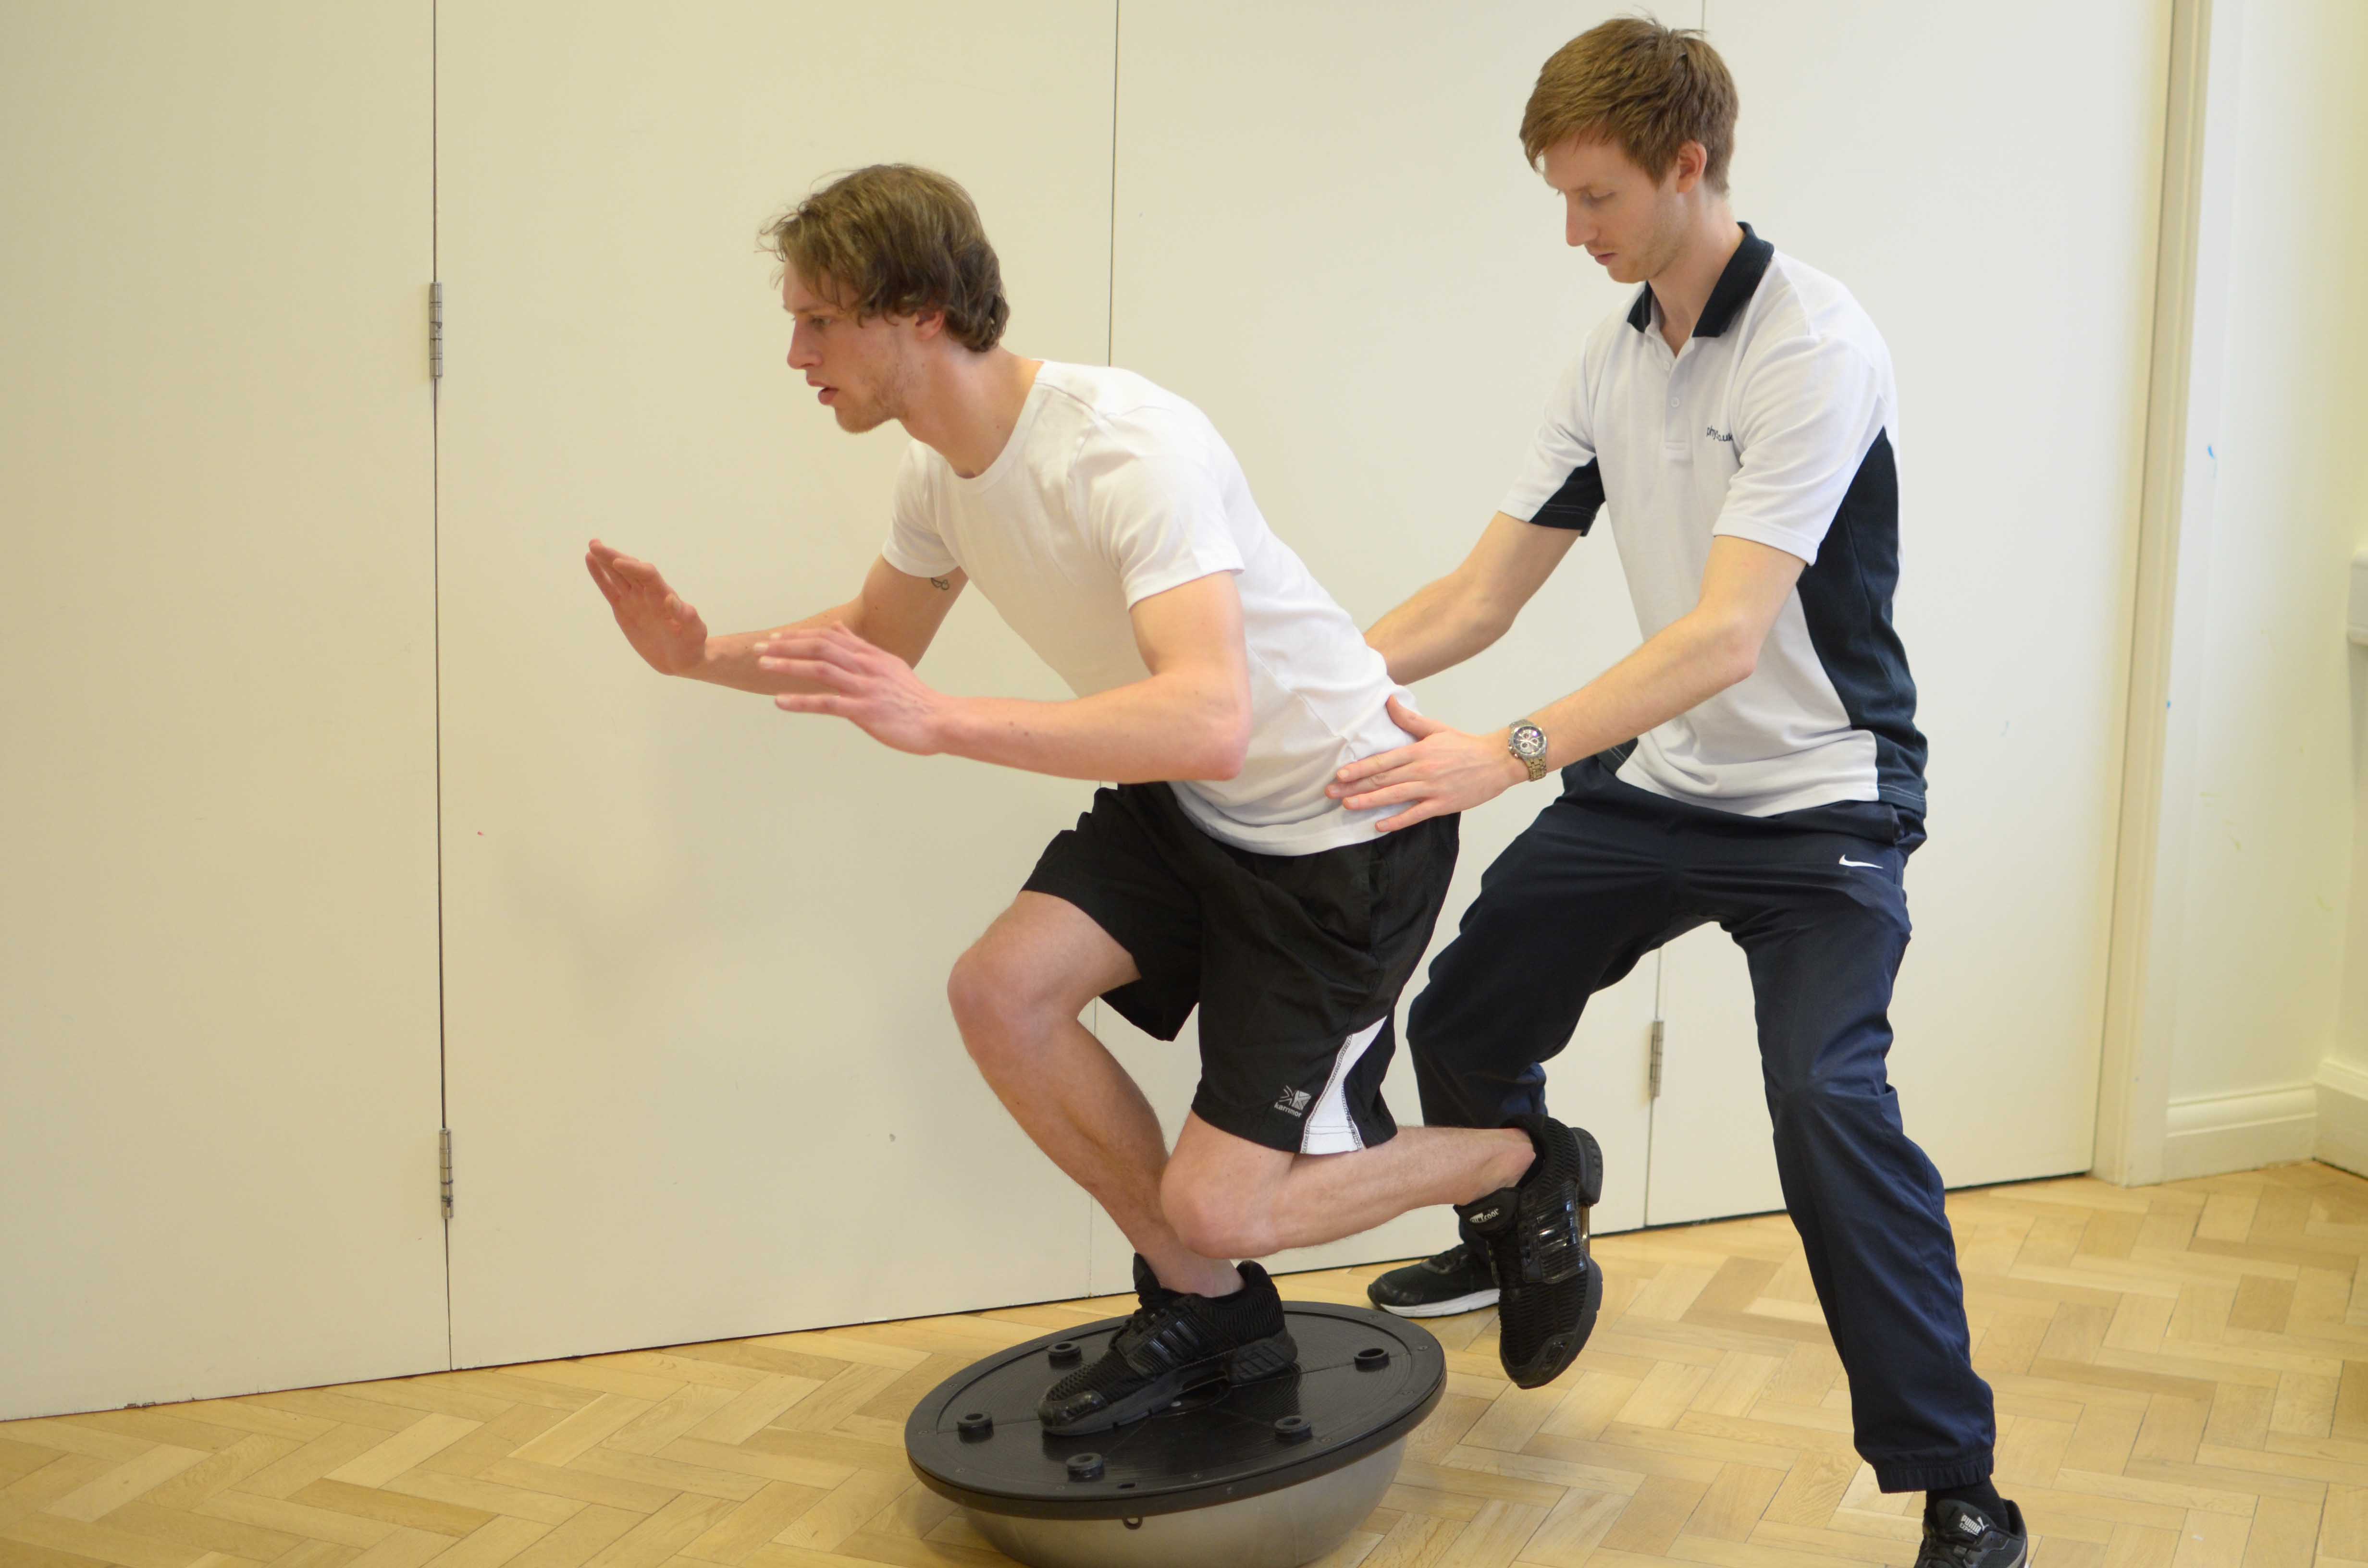 Dynamic stabilisation exercises to challange the iliotibial band supervised by physiotherapist